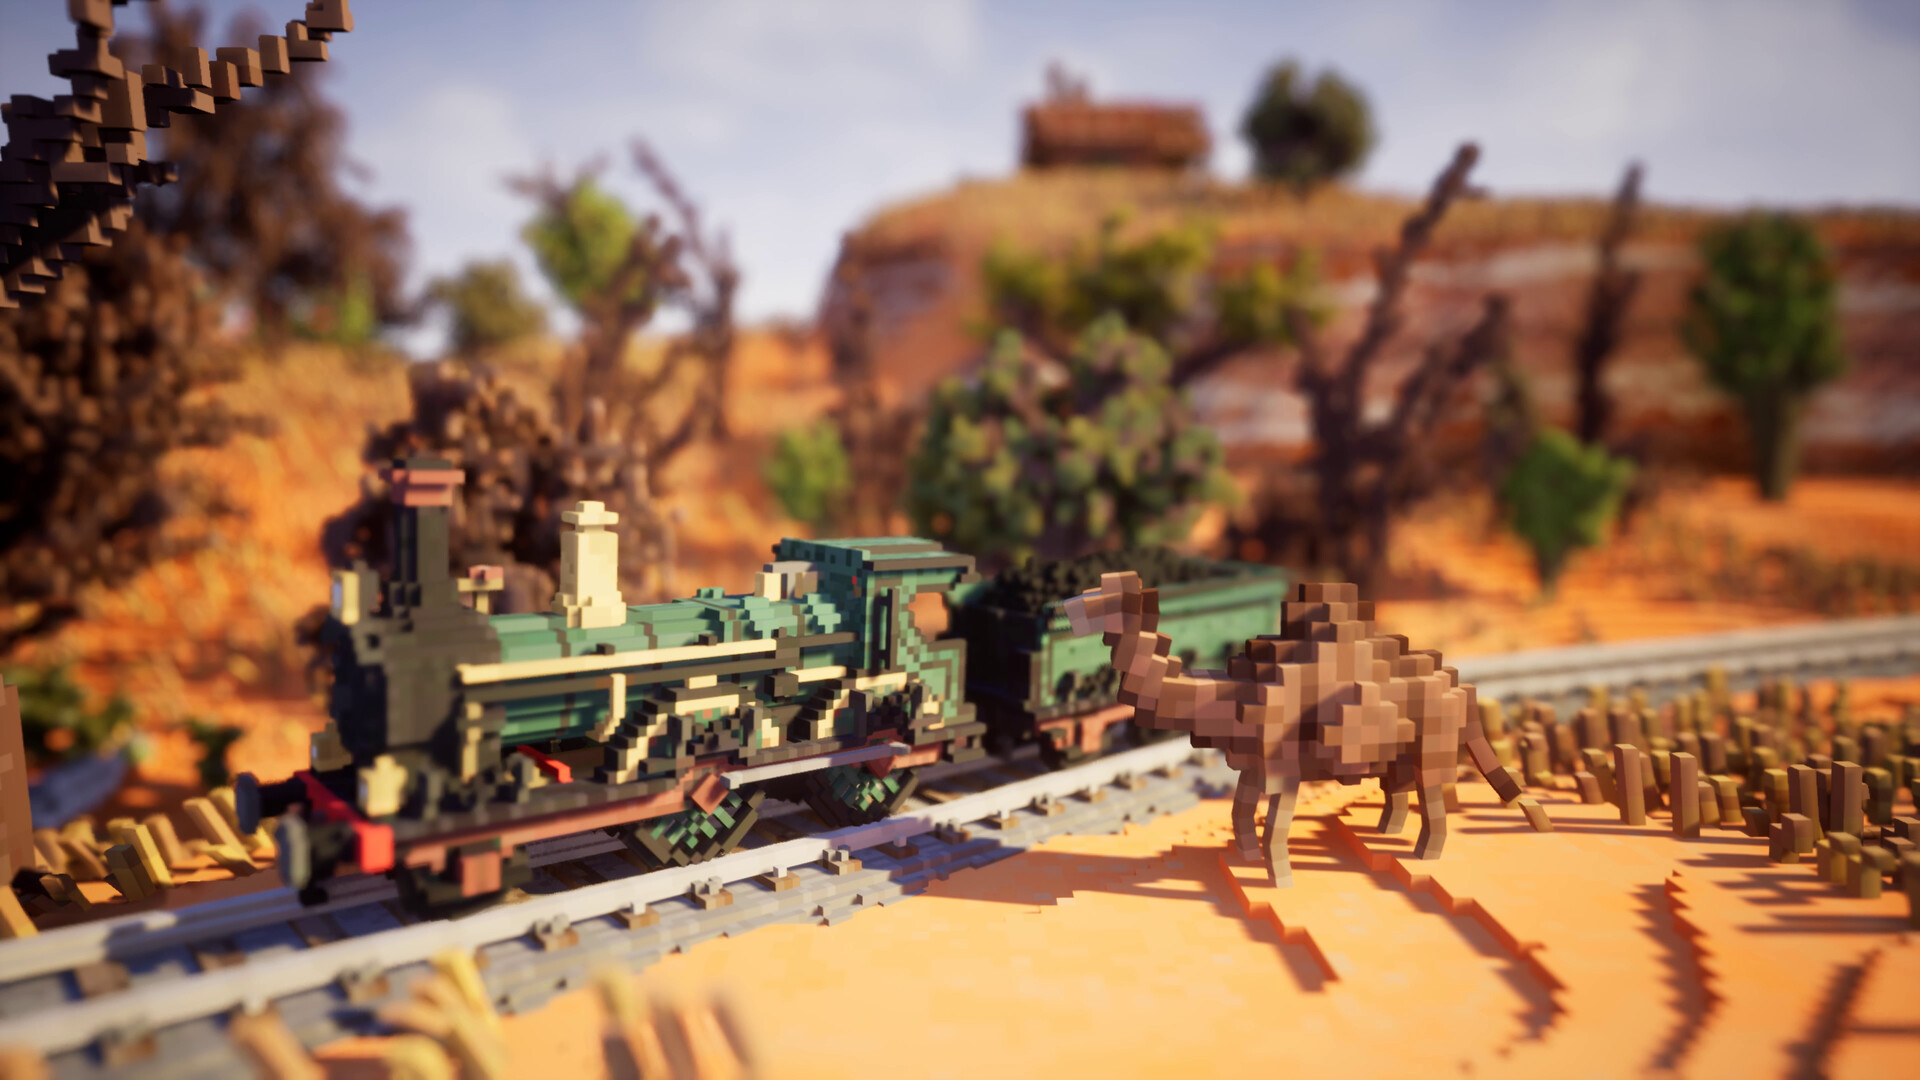 A train passing by a camel